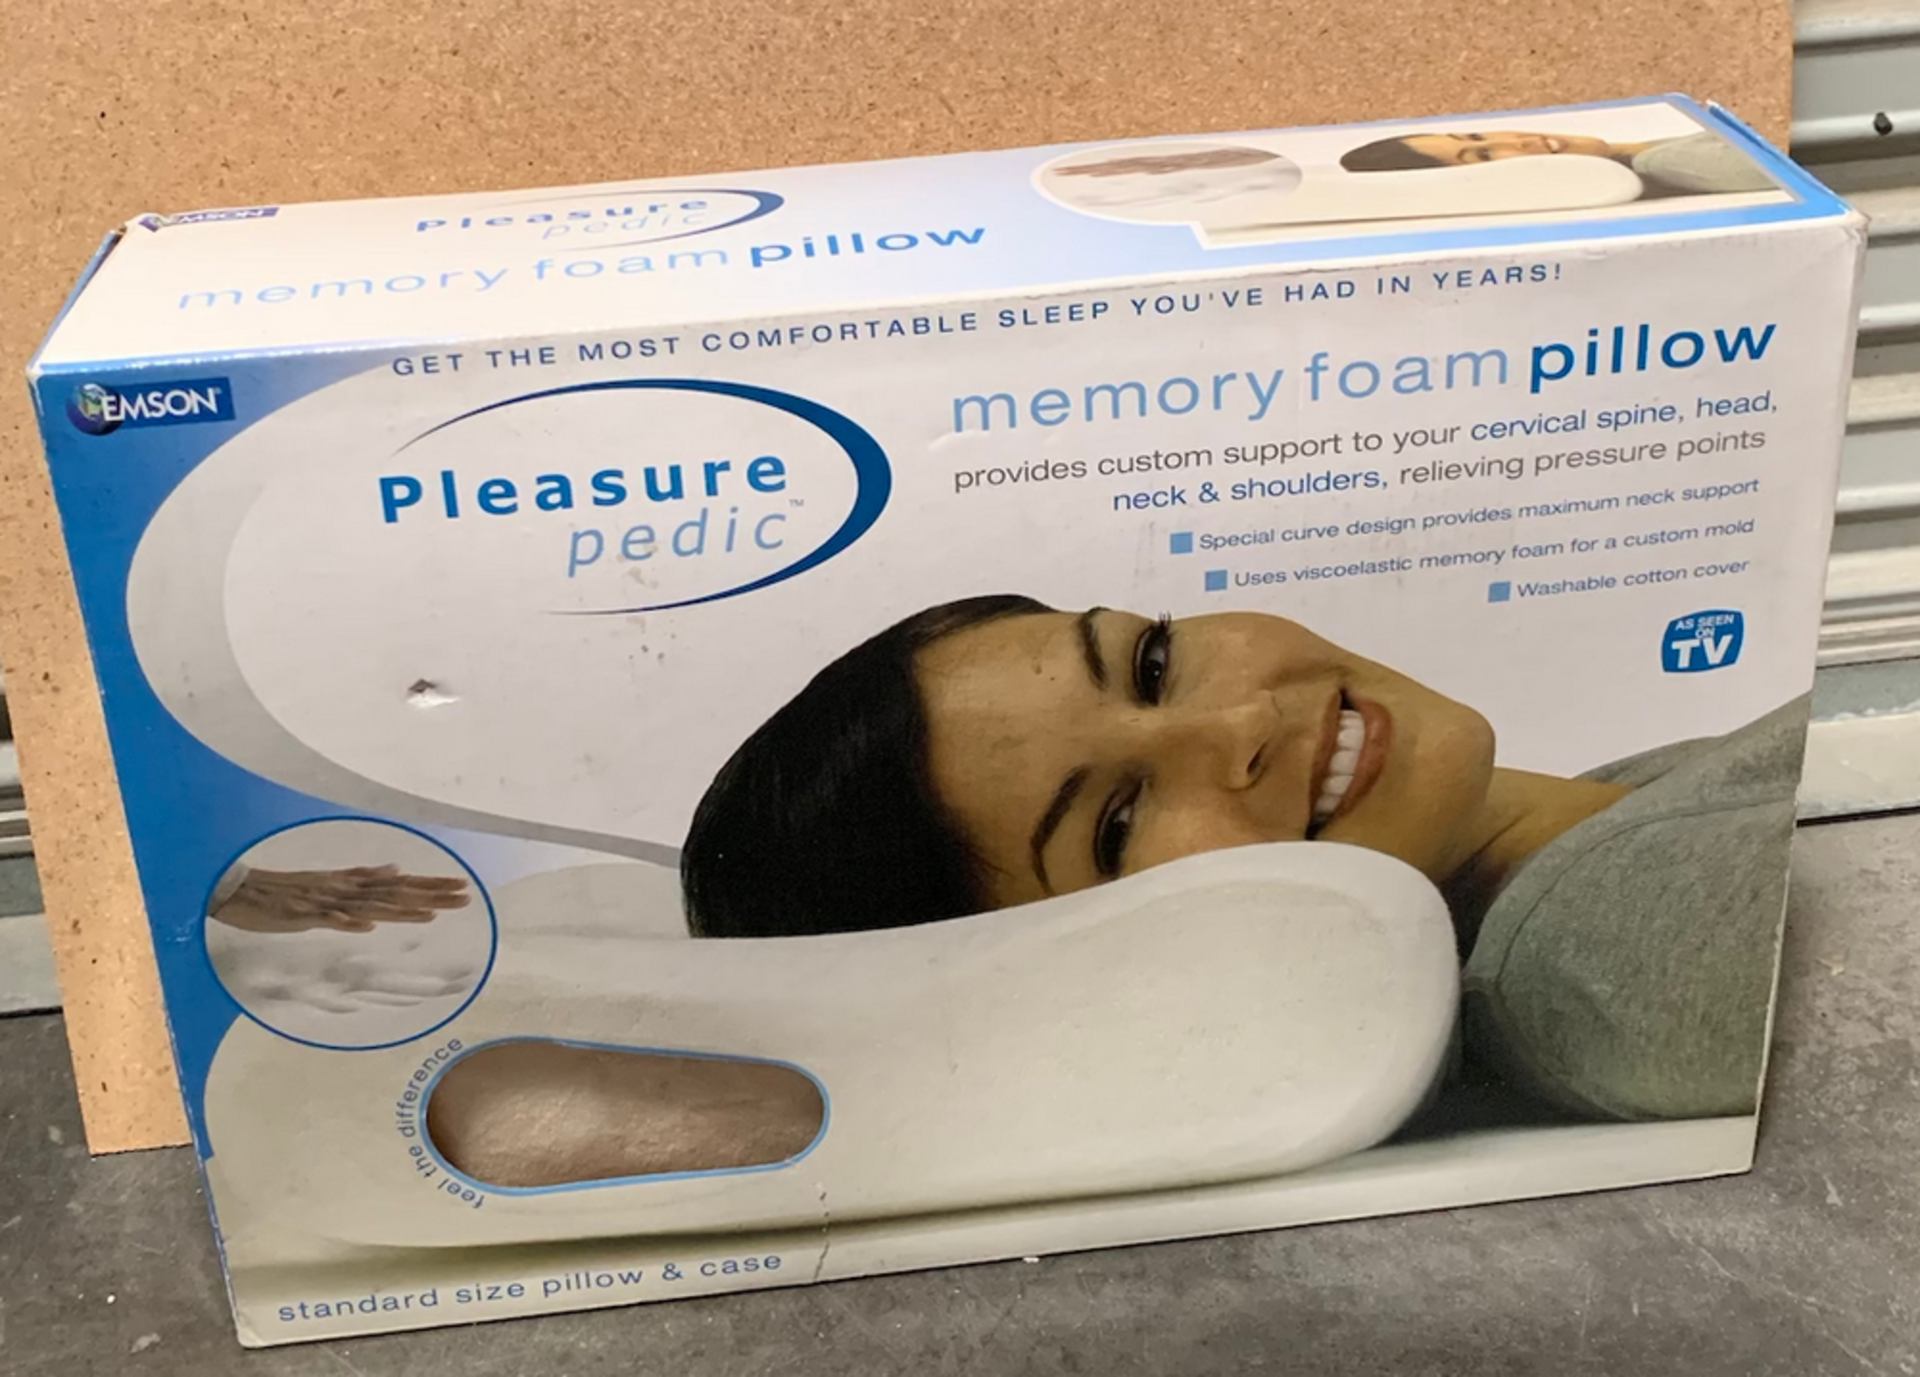 3 Memory Foam Pillows, including Conair Sleeping Set, All in Box - Image 2 of 4